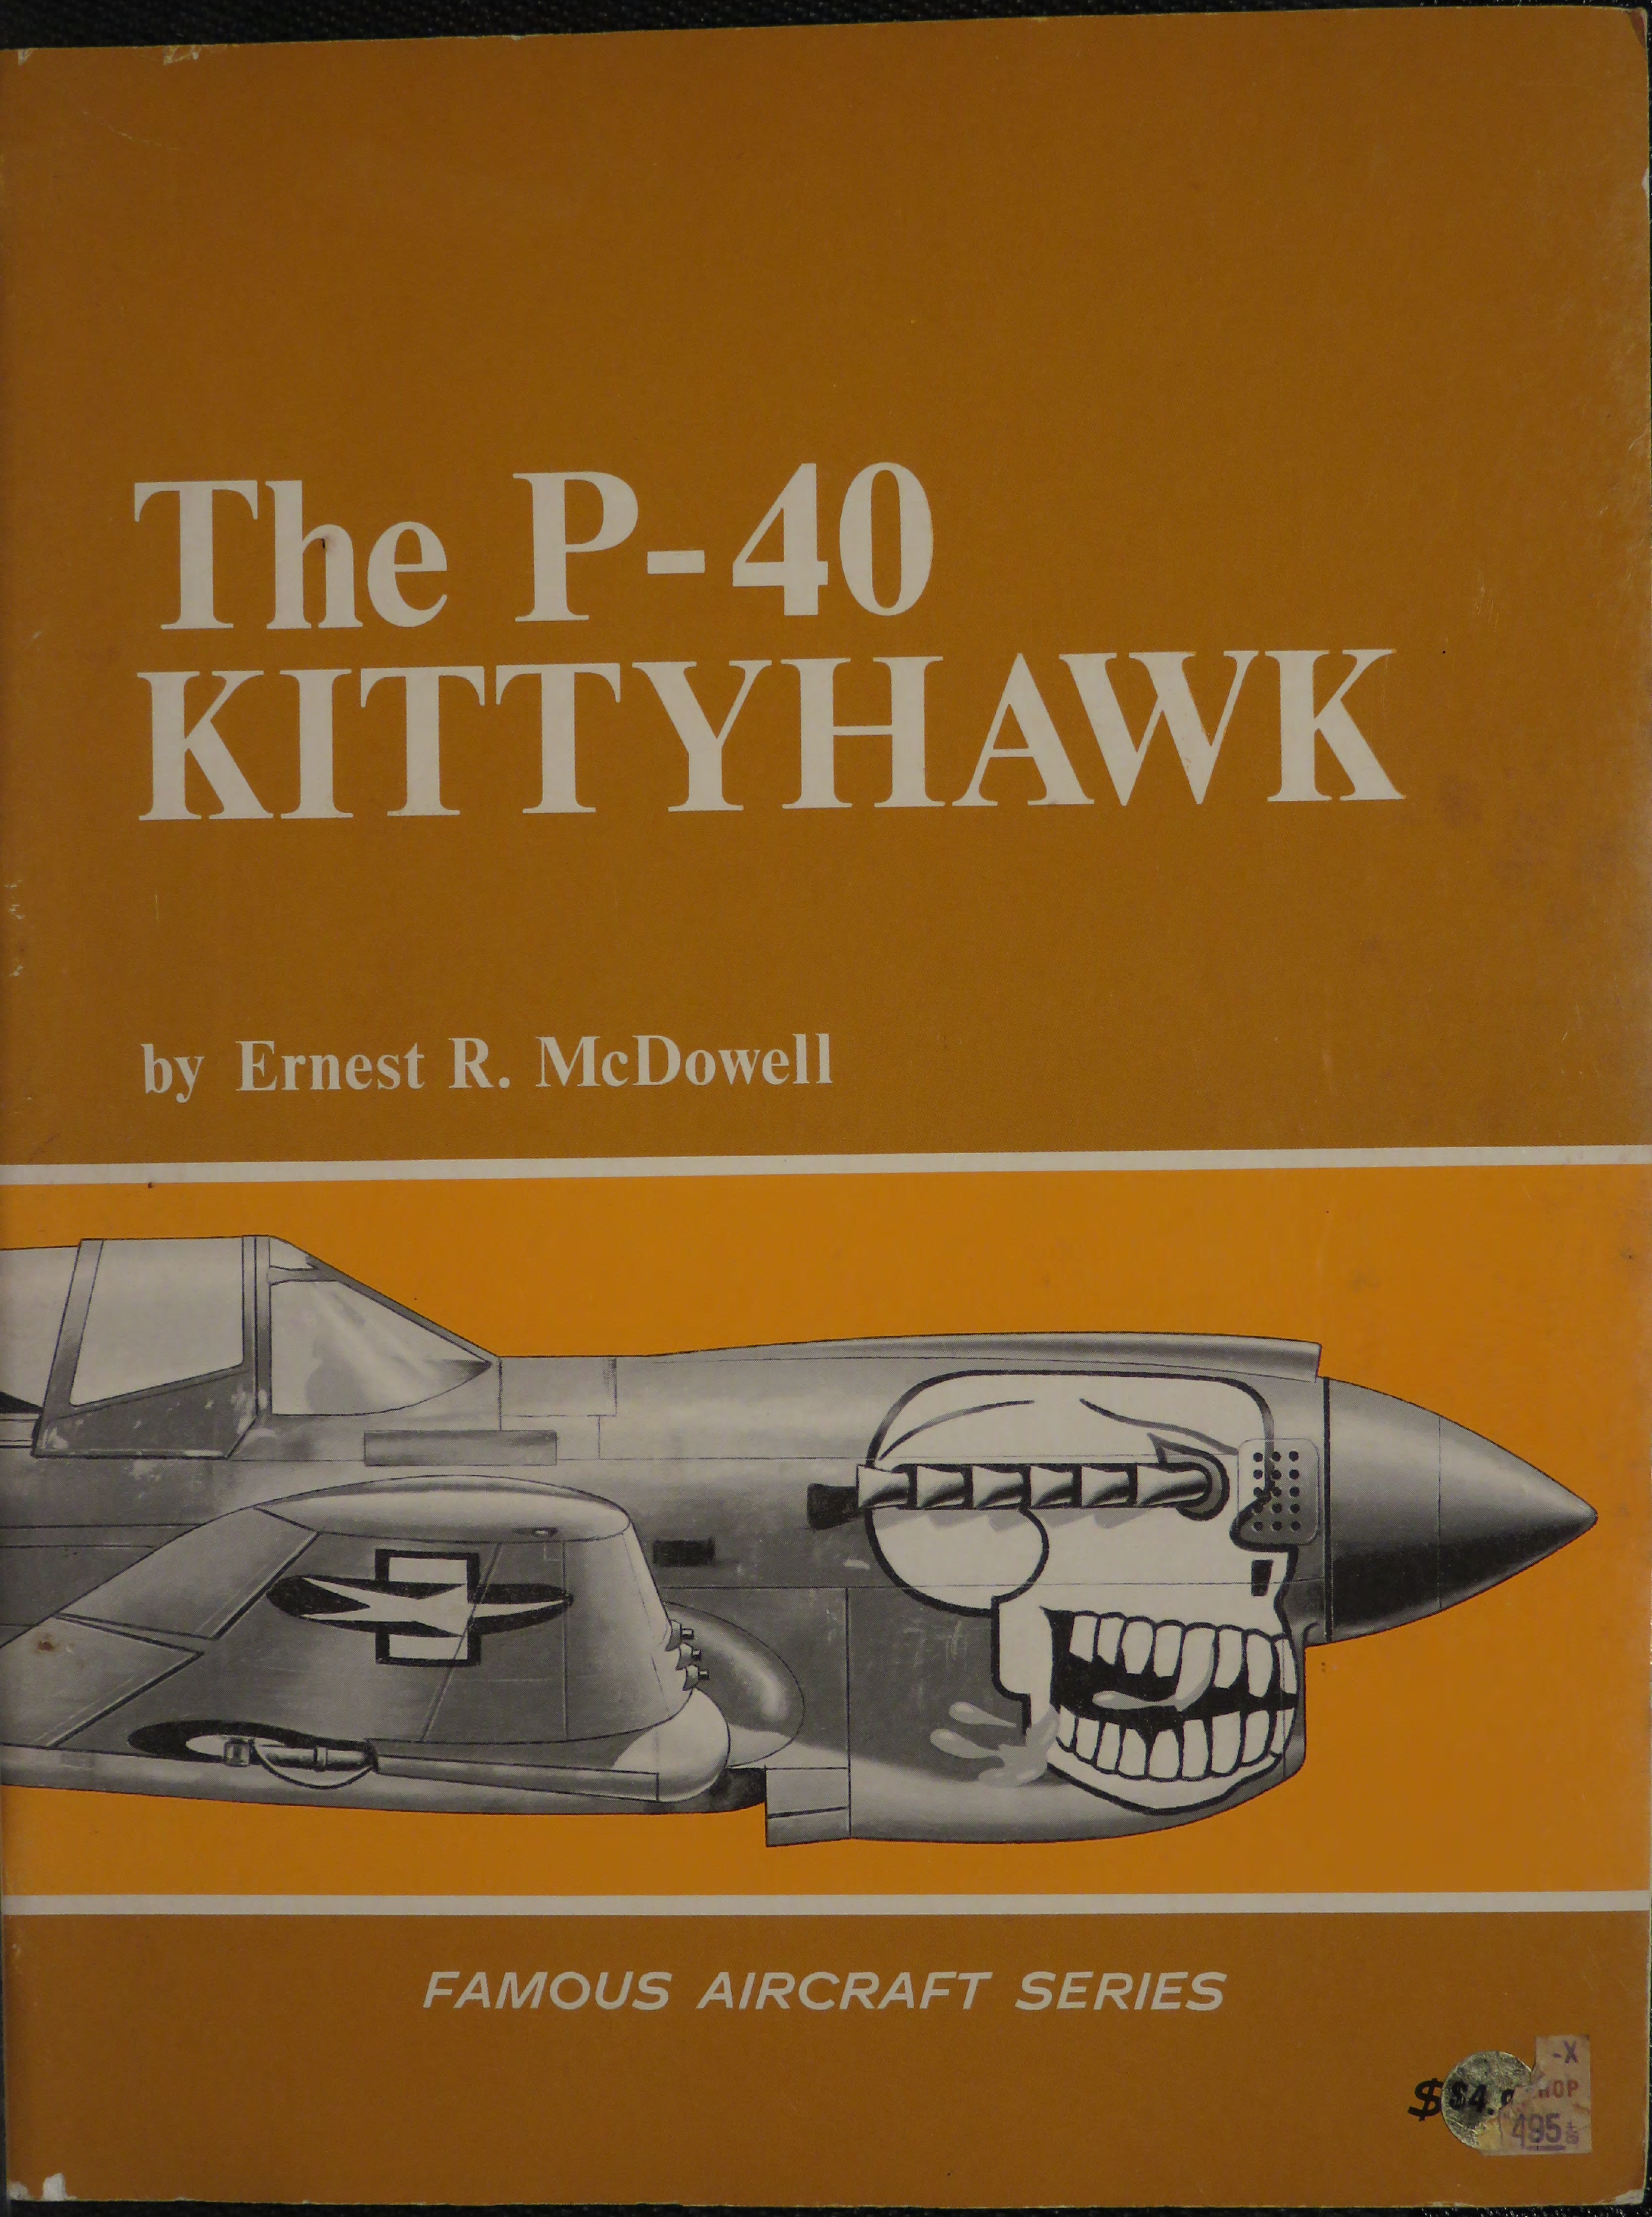 Sample page 1 from AirCorps Library document: The P-40 Kittyhawk